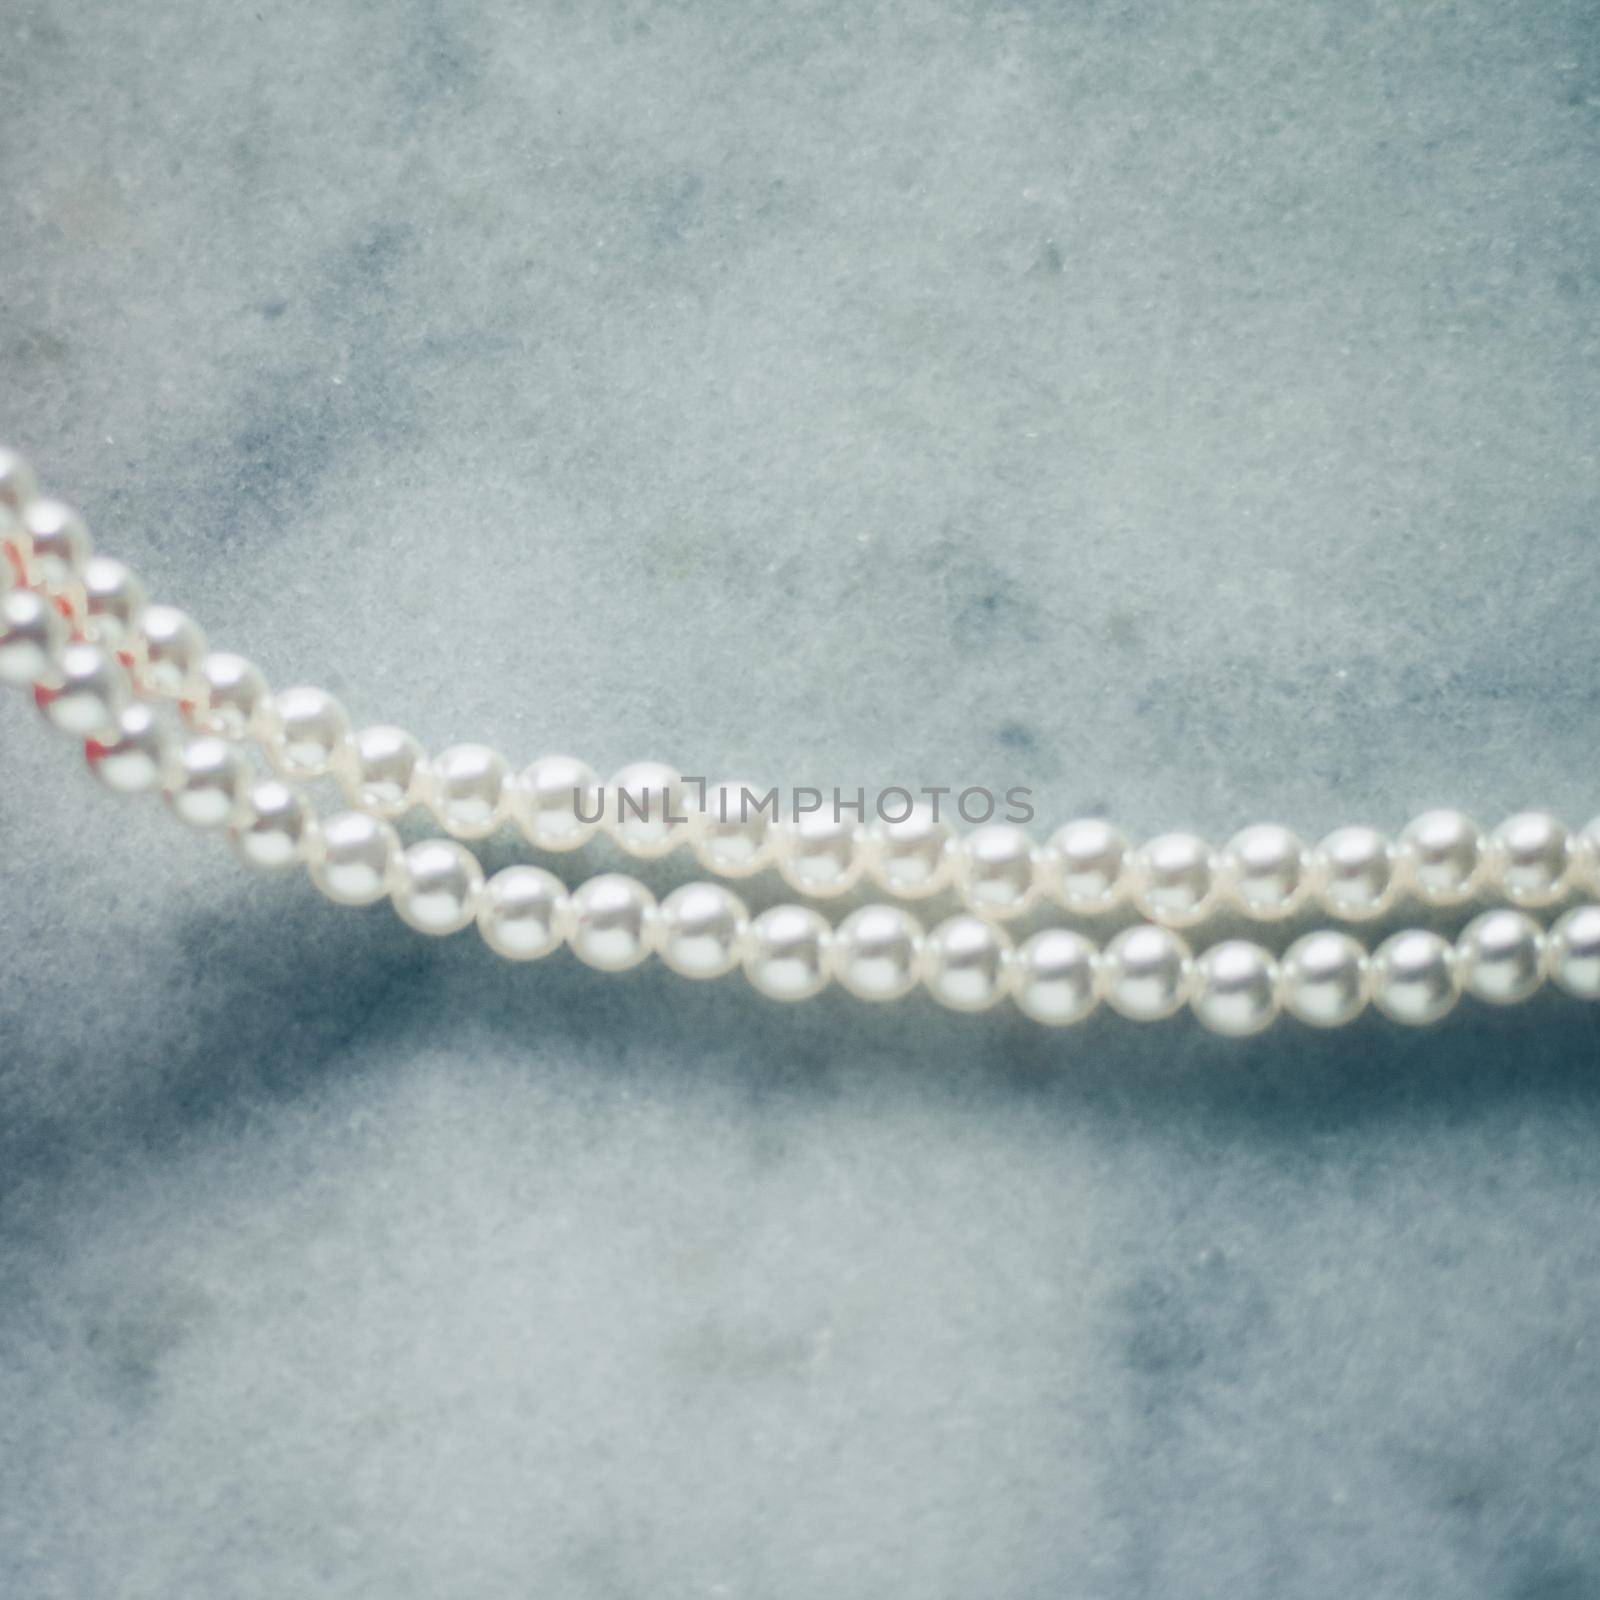 pearl jewellery - luxury gift for her styled concept, elegant visuals